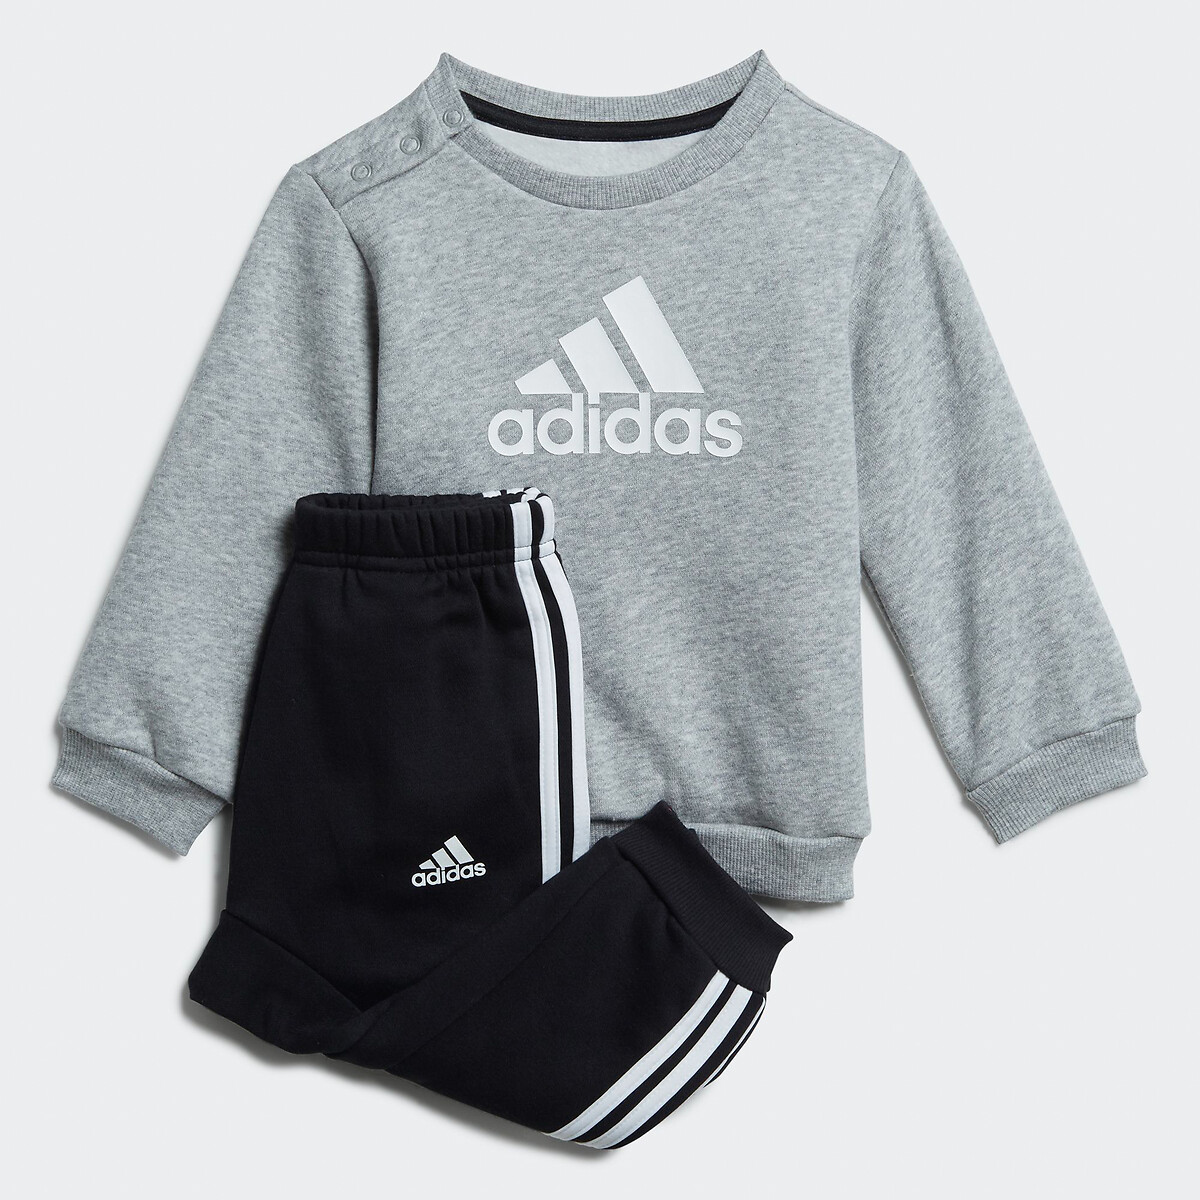 Kids adidas Joggers | Skinny Jogging Pants for Girls & Boys | Sports Direct